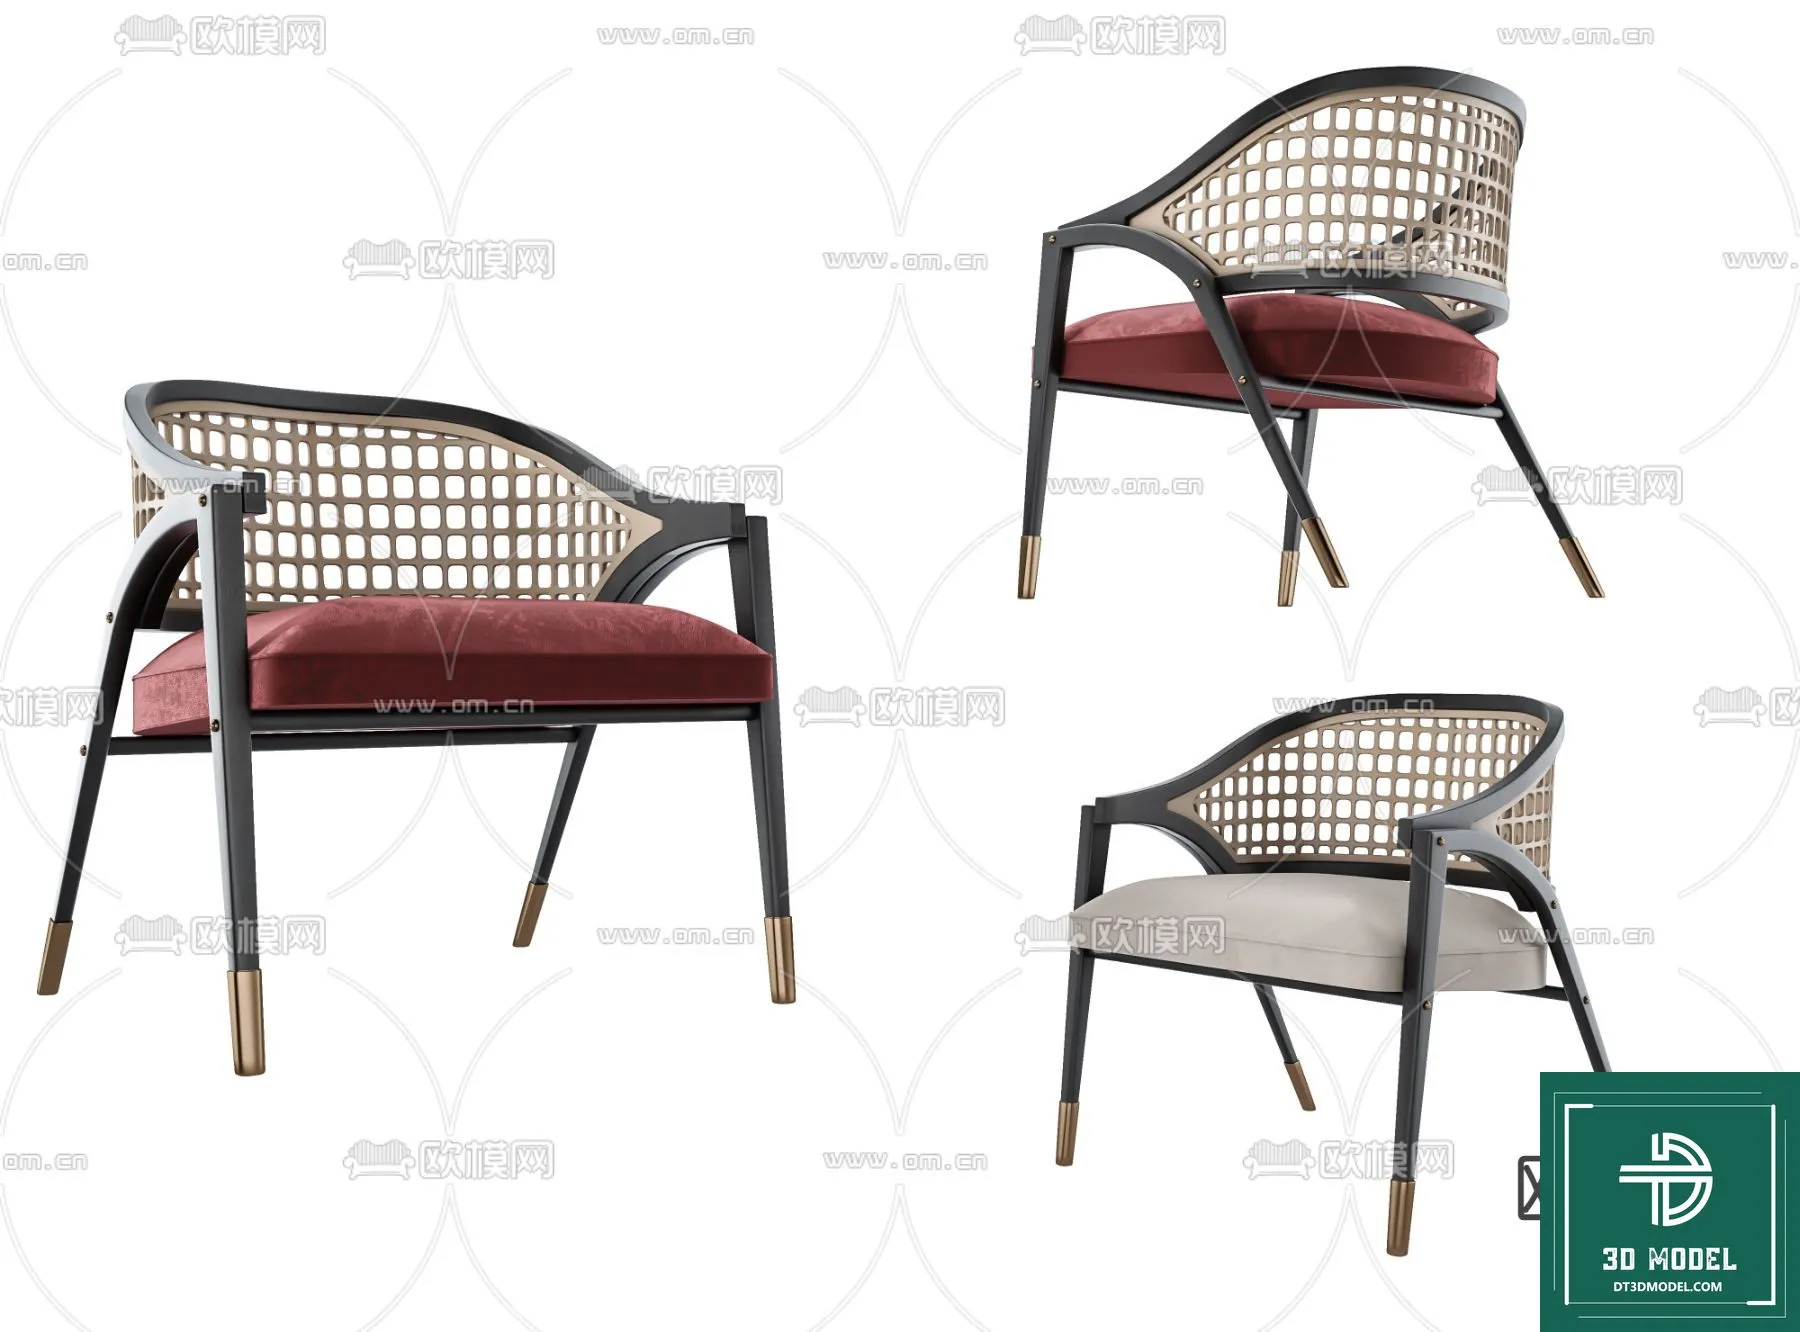 INDOCHINE STYLE – 3D MODELS – 563